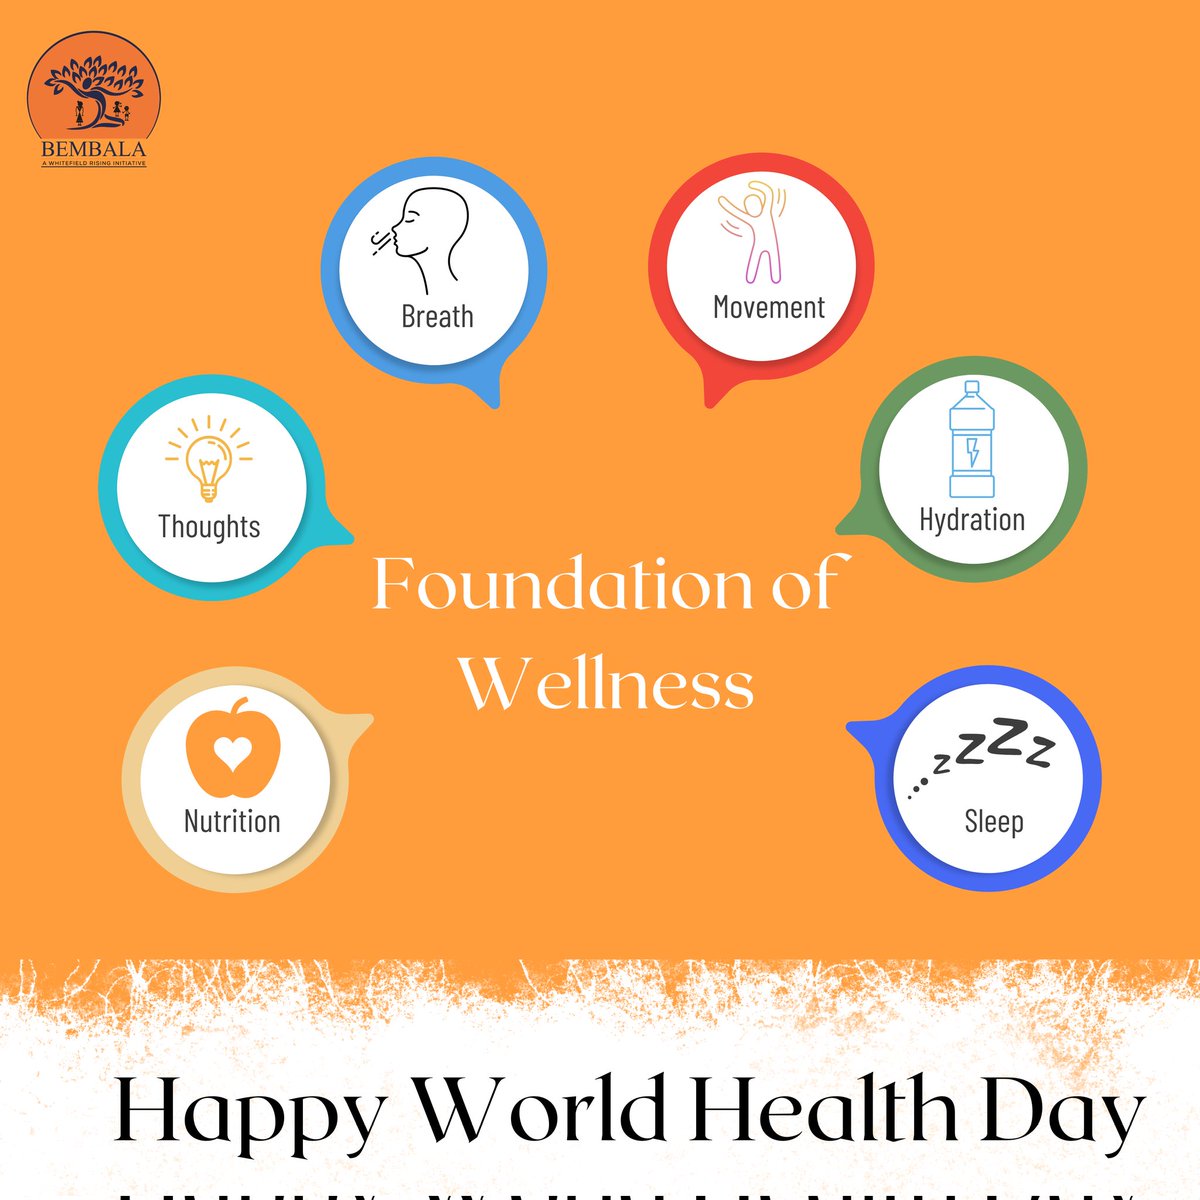 On World Health Day, let's celebrate the gift of good mental and physical health and remember to take care of ourselves and each other. Wishing you a vibrant and healthy life ahead! #BembalaFoundation #Support #SafeSpace #supportforwomen #WomenEmpowerment #ngoinbangalore